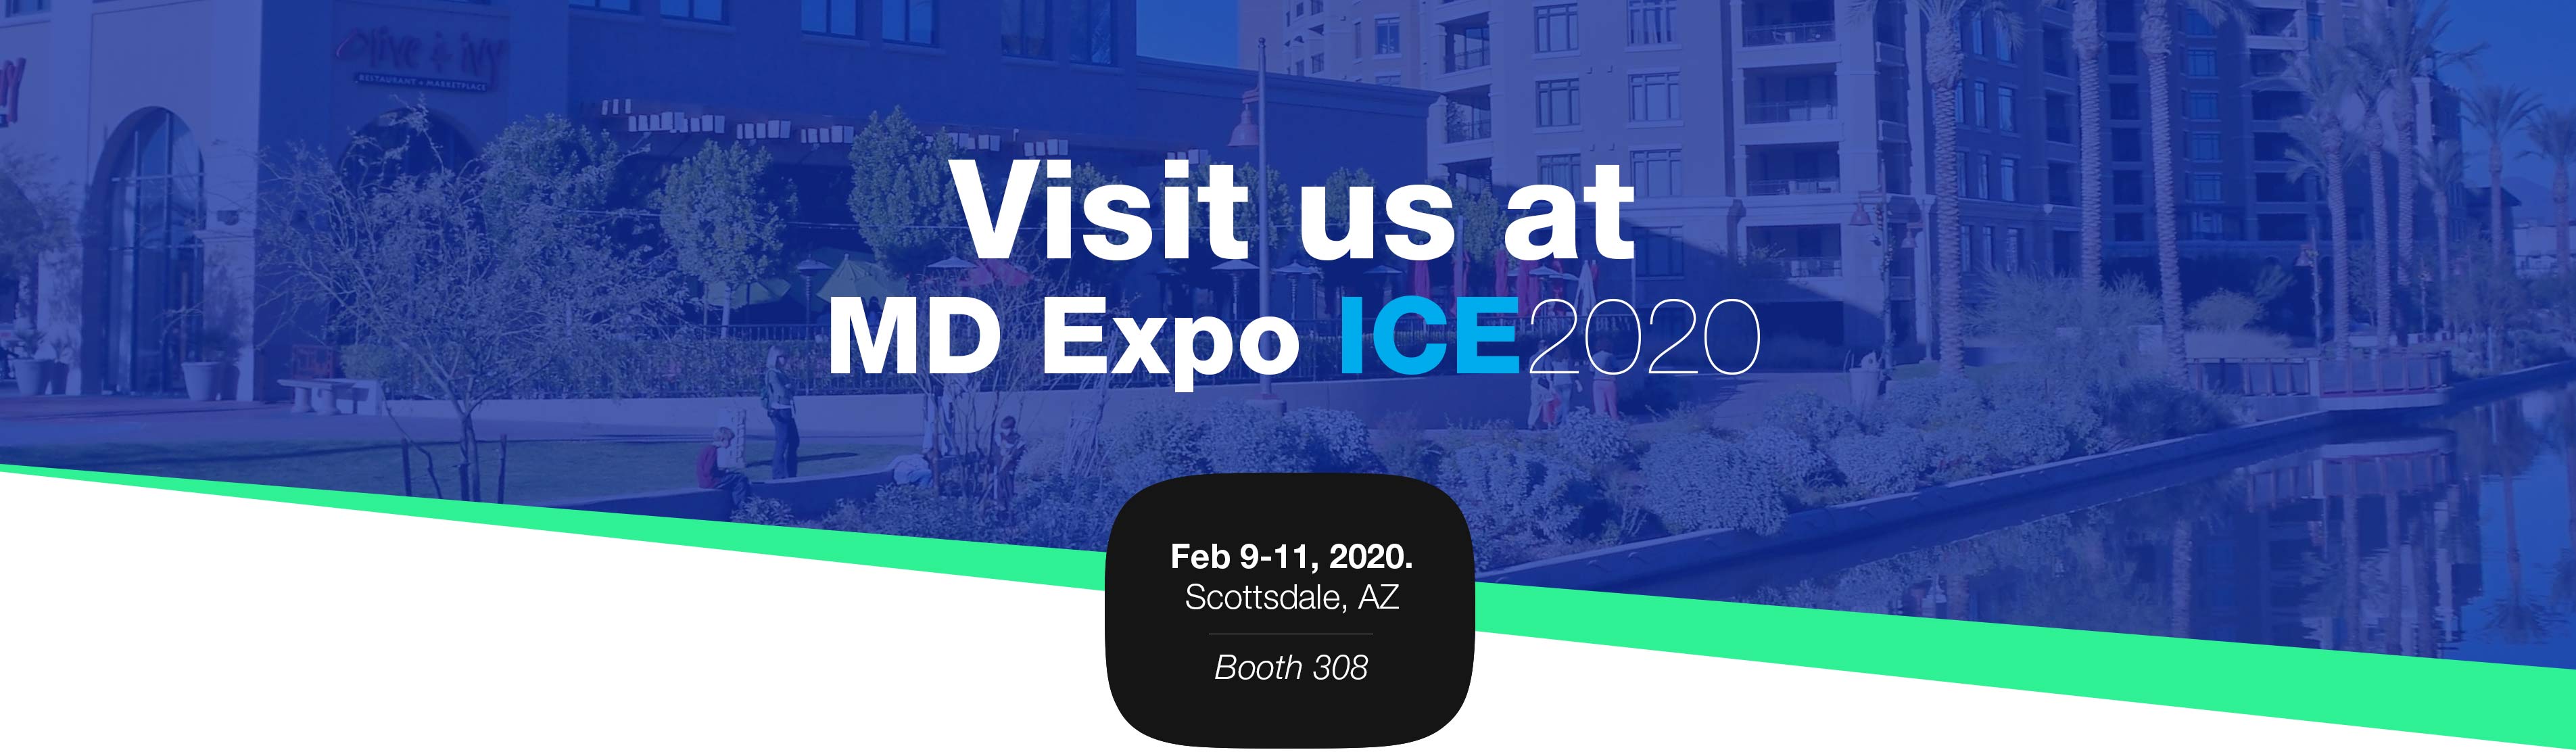 MD Expo ICE 2020 CIRS